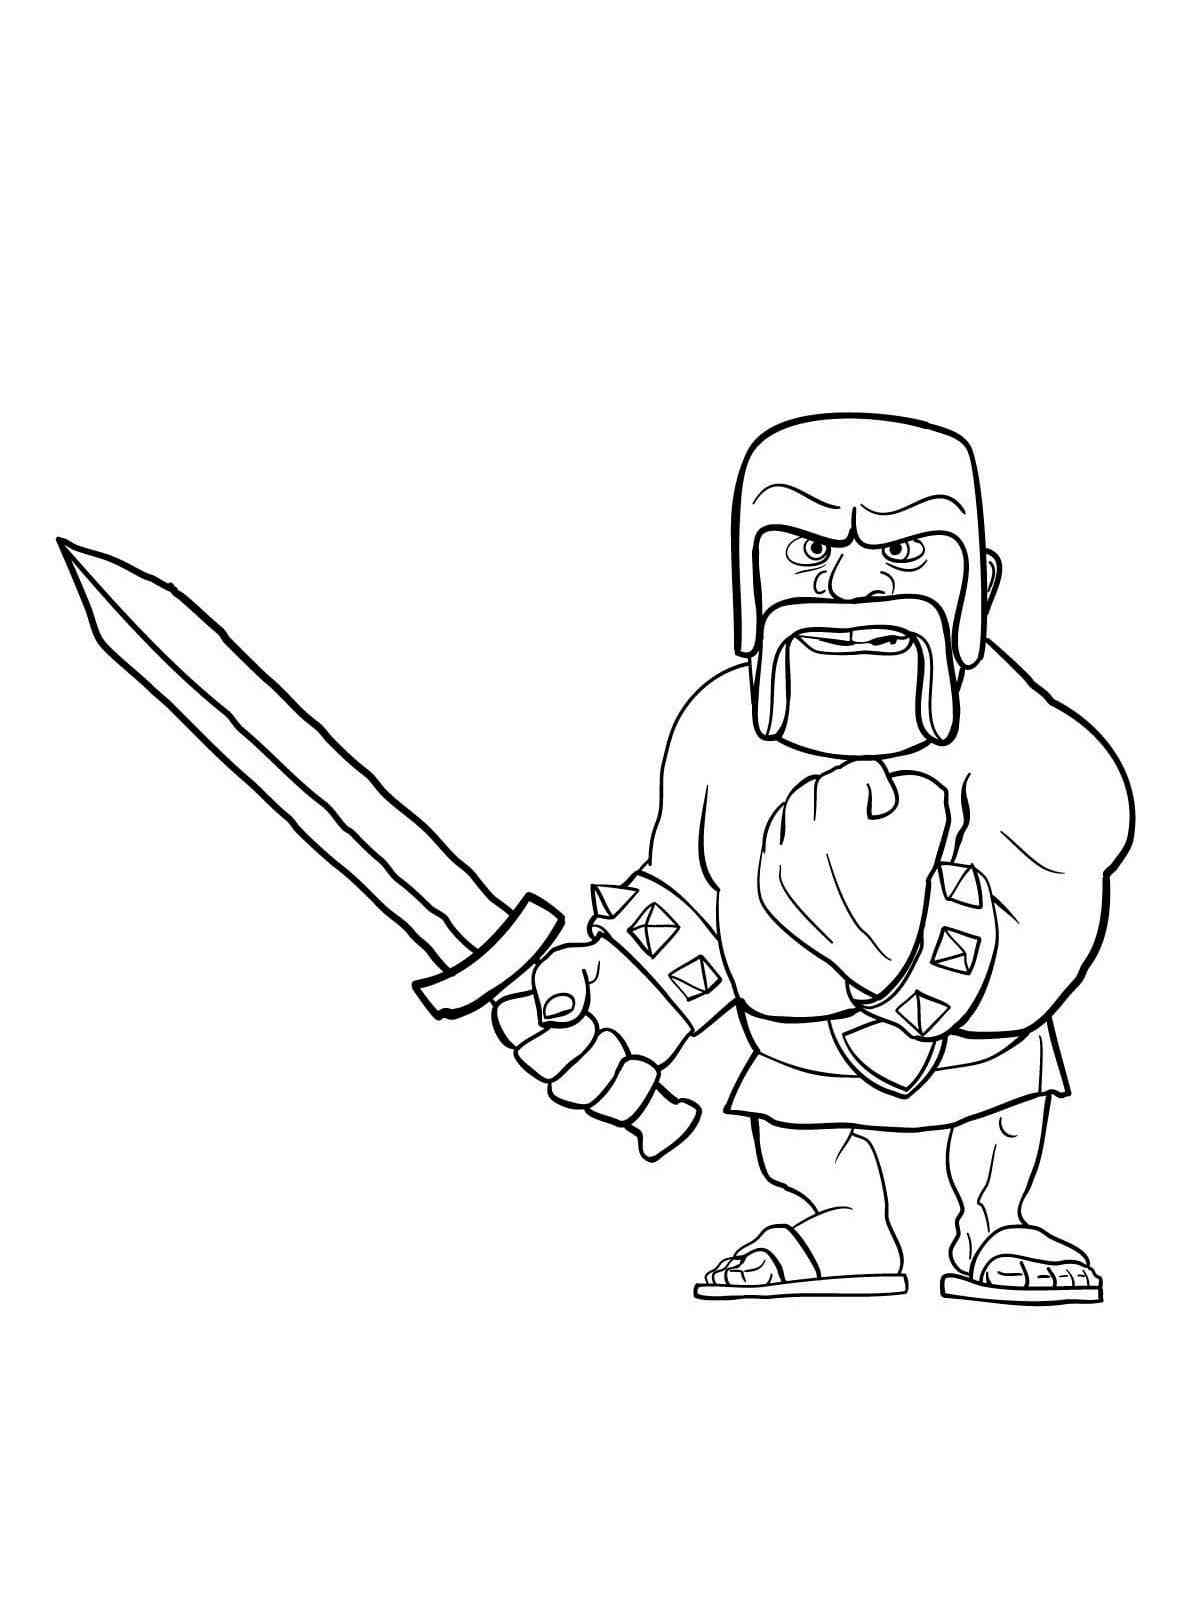 Barbarian Clash Of Clans coloring page